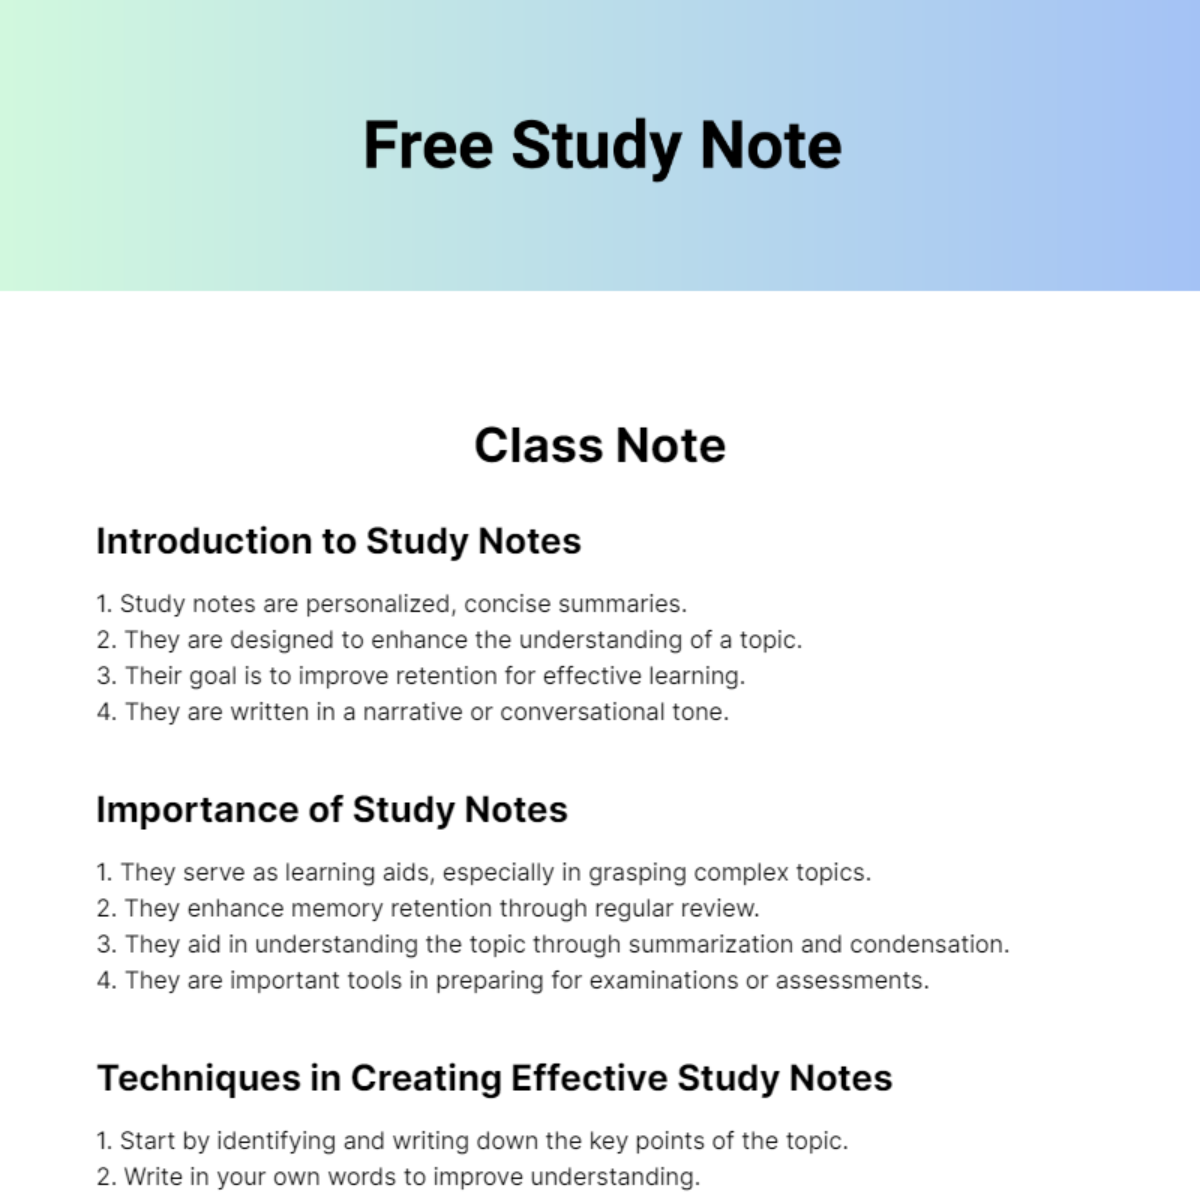 Free Study Note Template